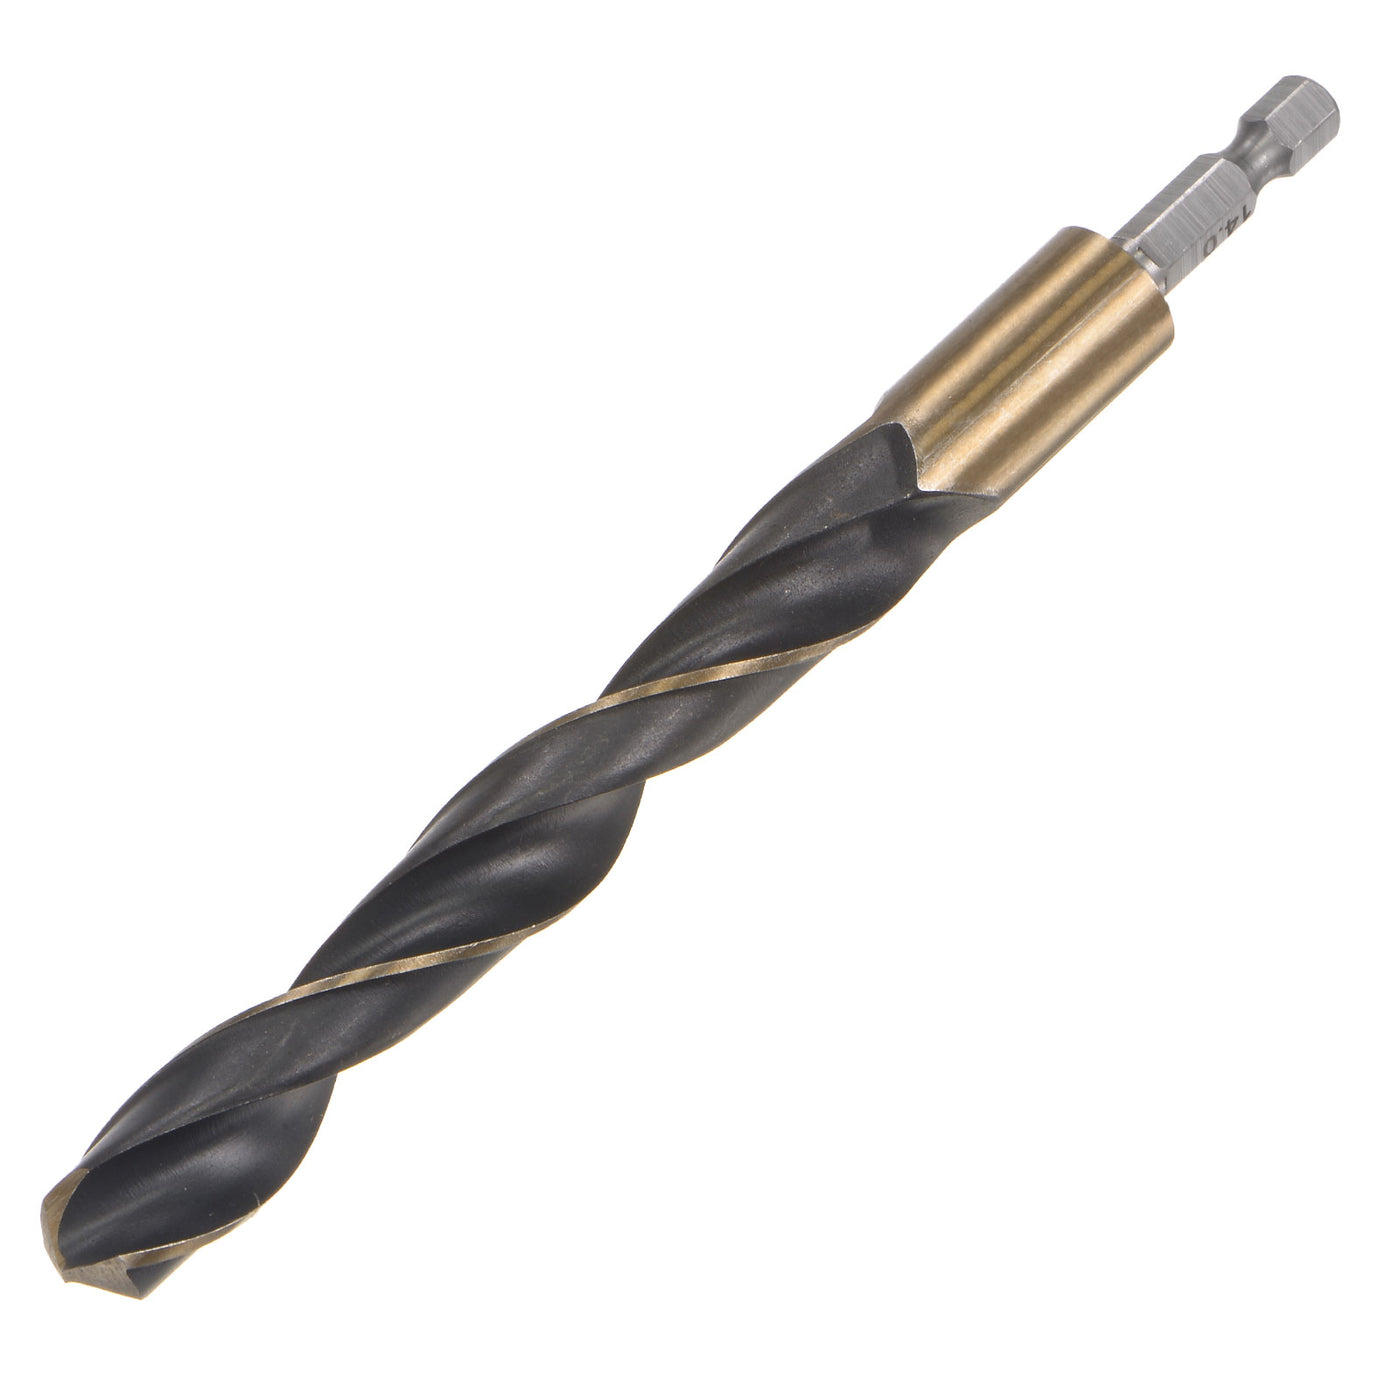 uxcell Uxcell 14mm High Speed Steel Twist Drill Bit with Hex Shank 156mm Length